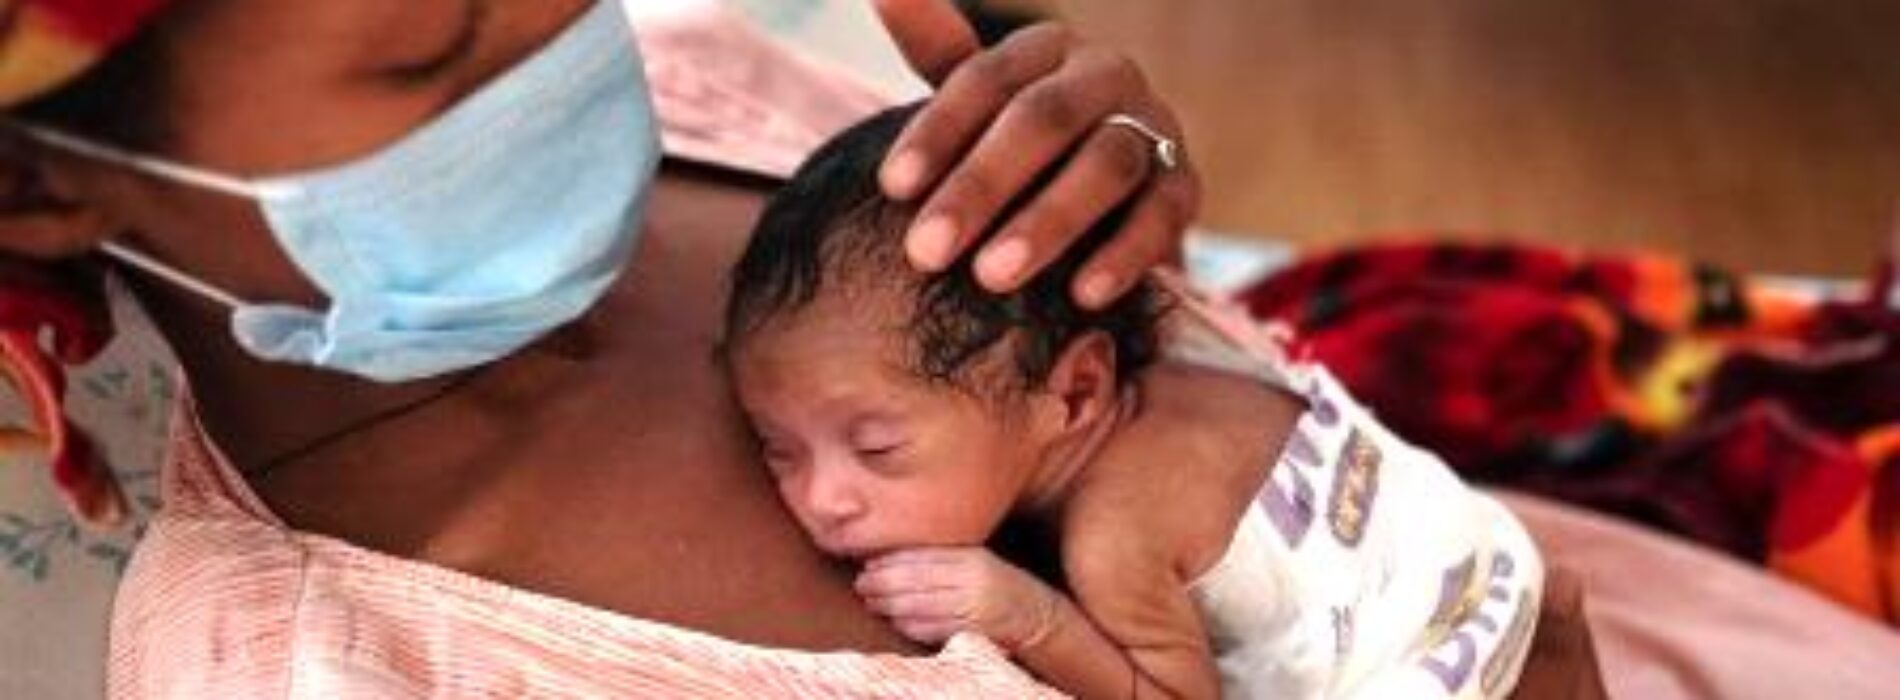 <strong>152 million babies born preterm in the last decade</strong>